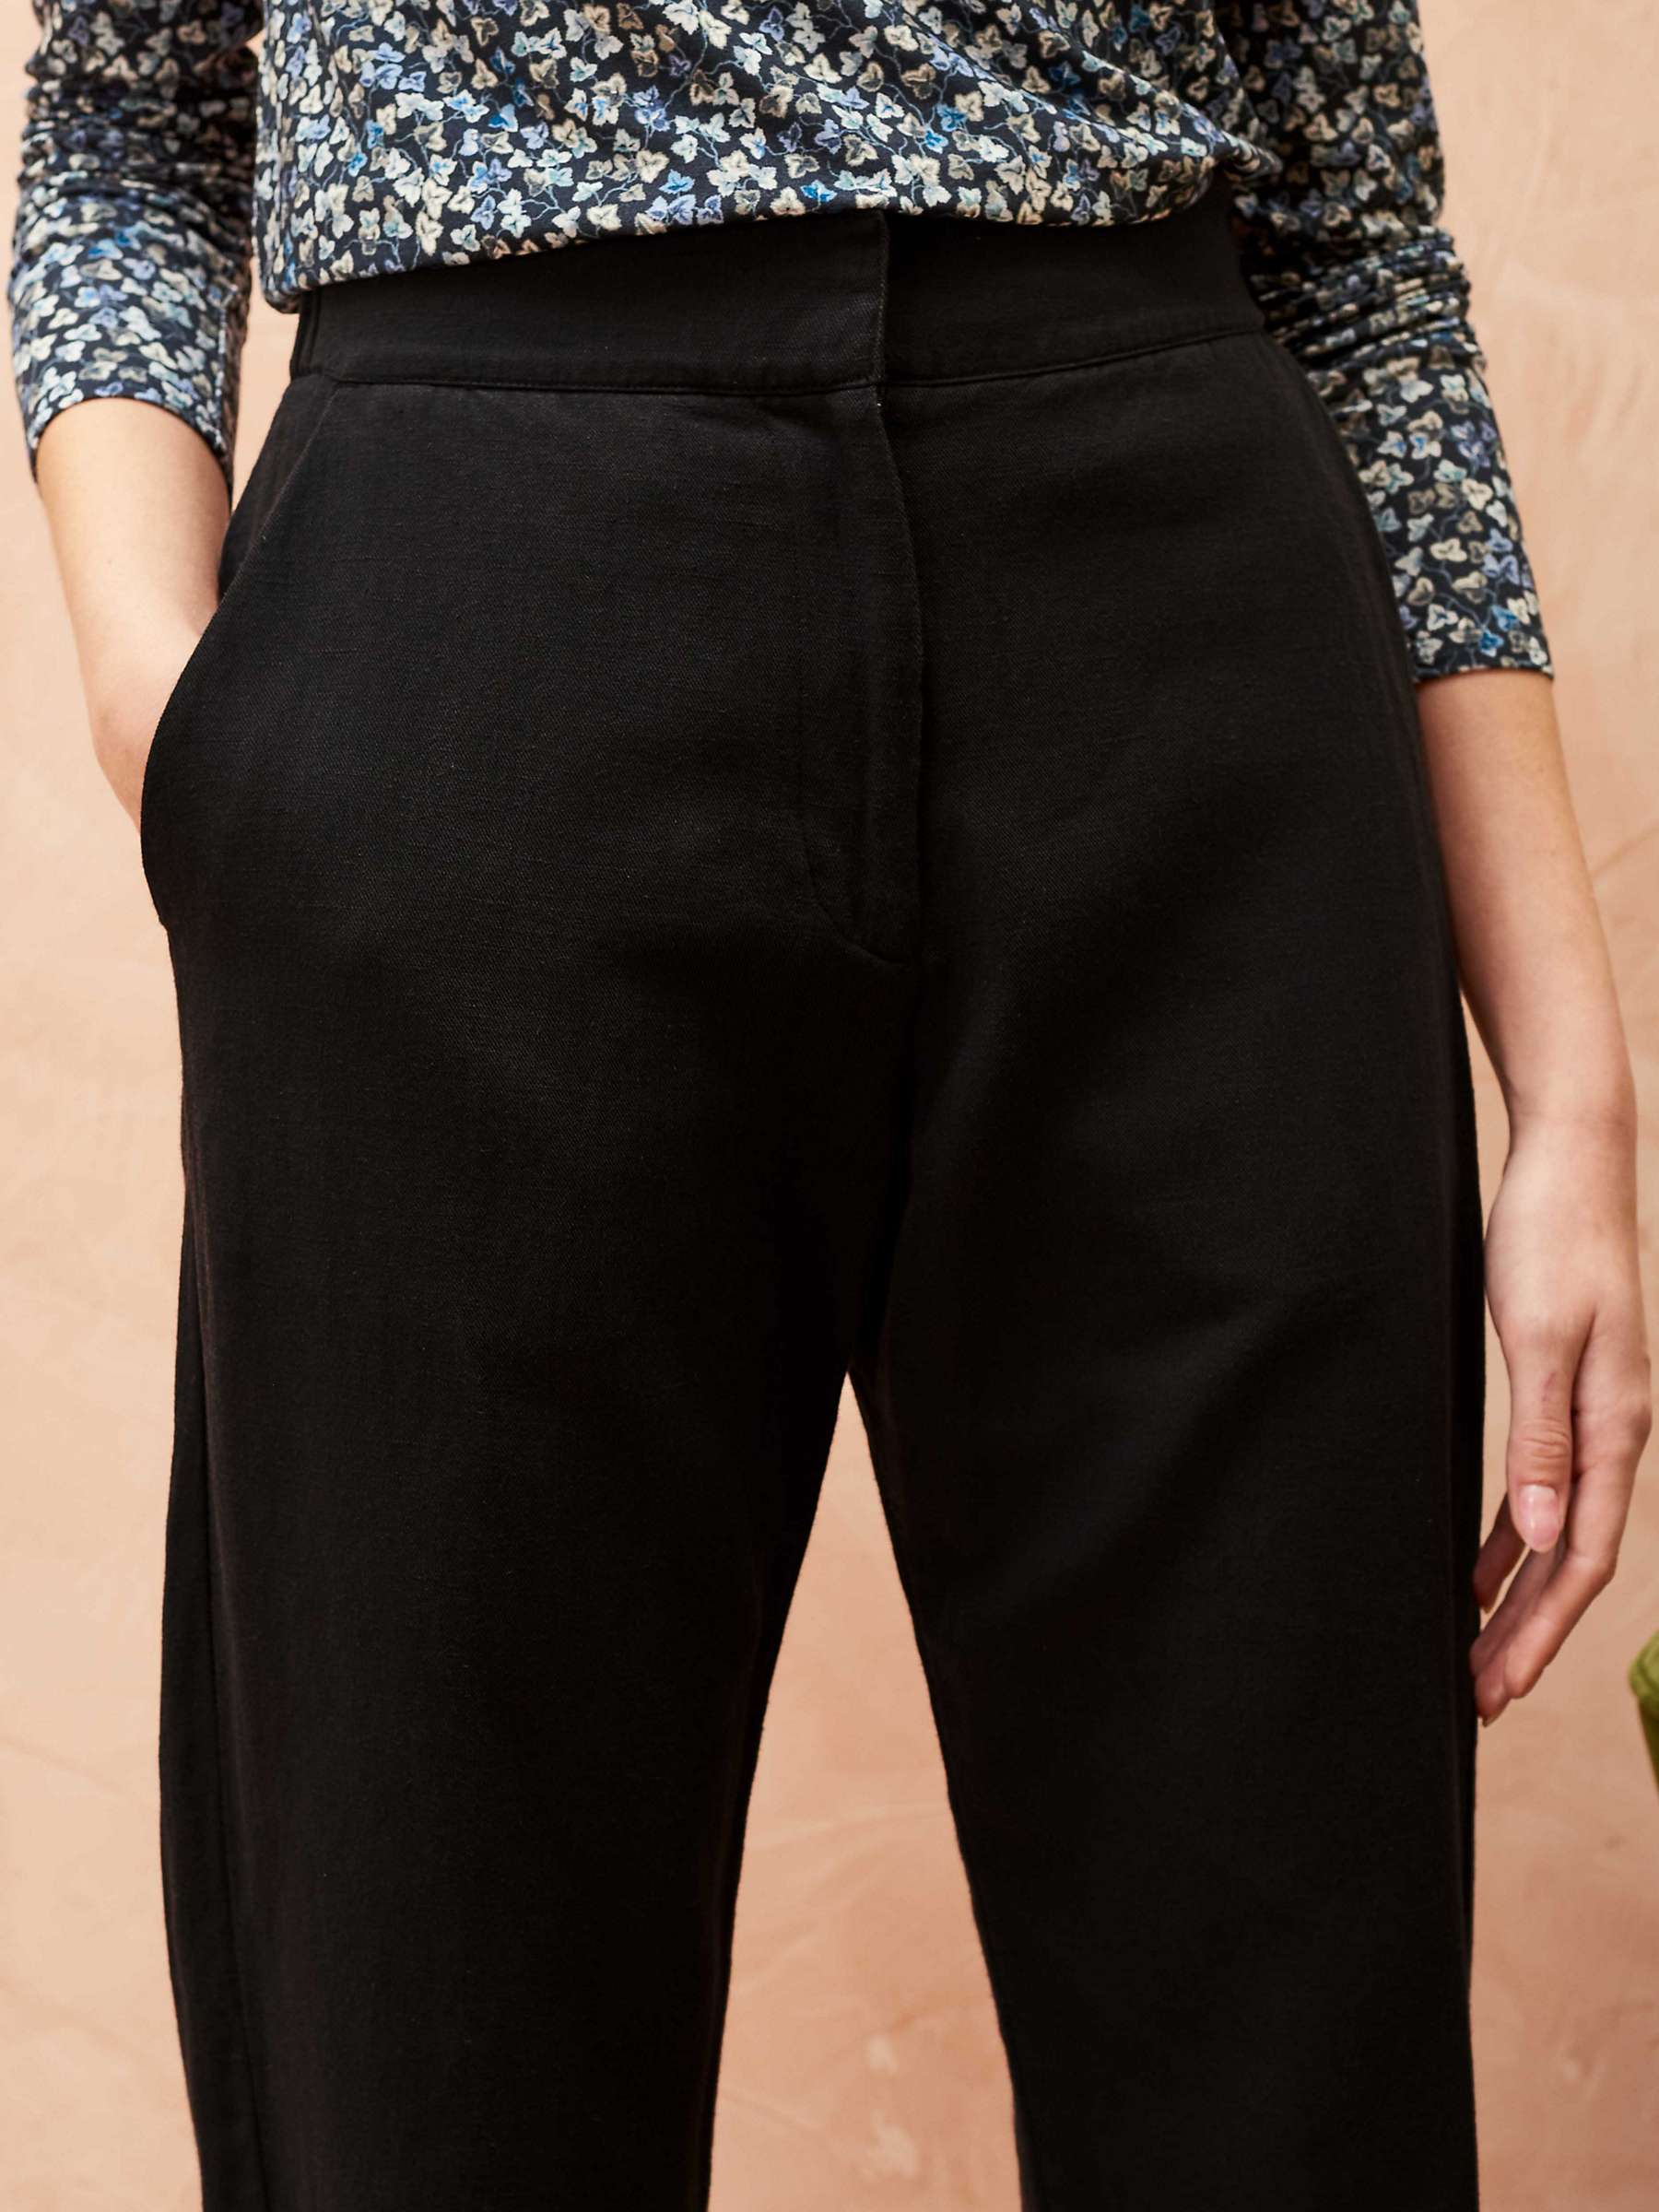 Buy Brora Linen and Cotton Blend Pull-On Trousers Online at johnlewis.com